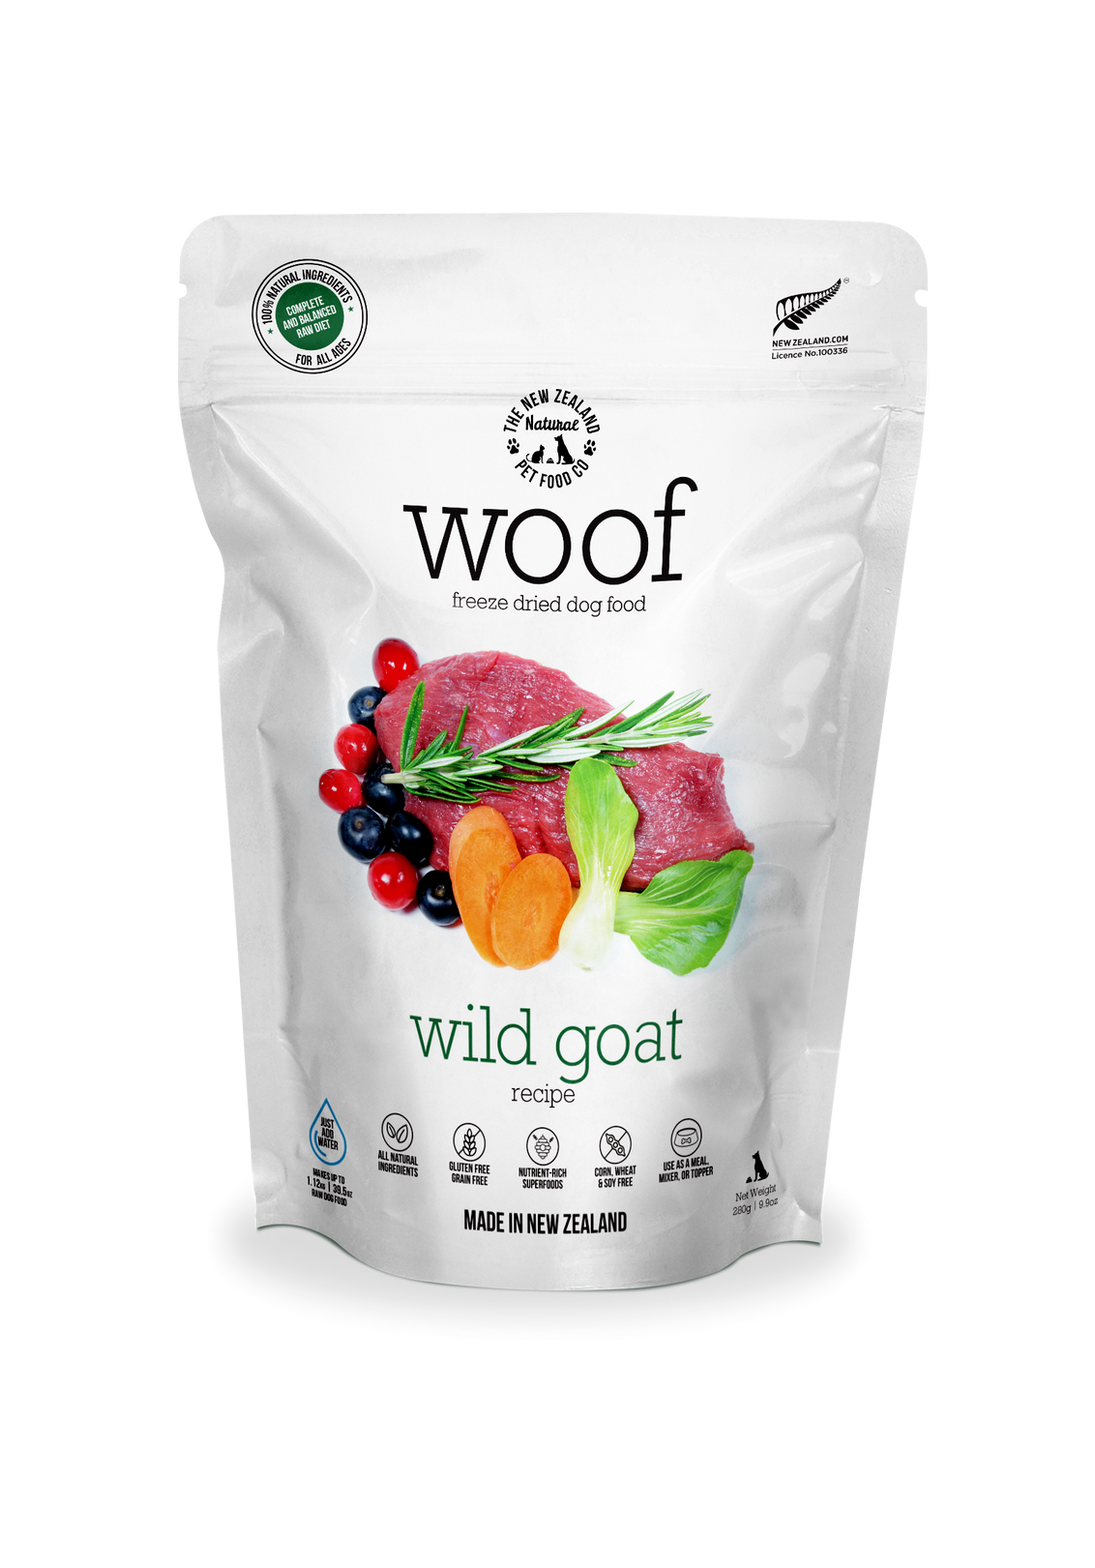 New Zealand Natural Freeze Dried Woof Wild Goat